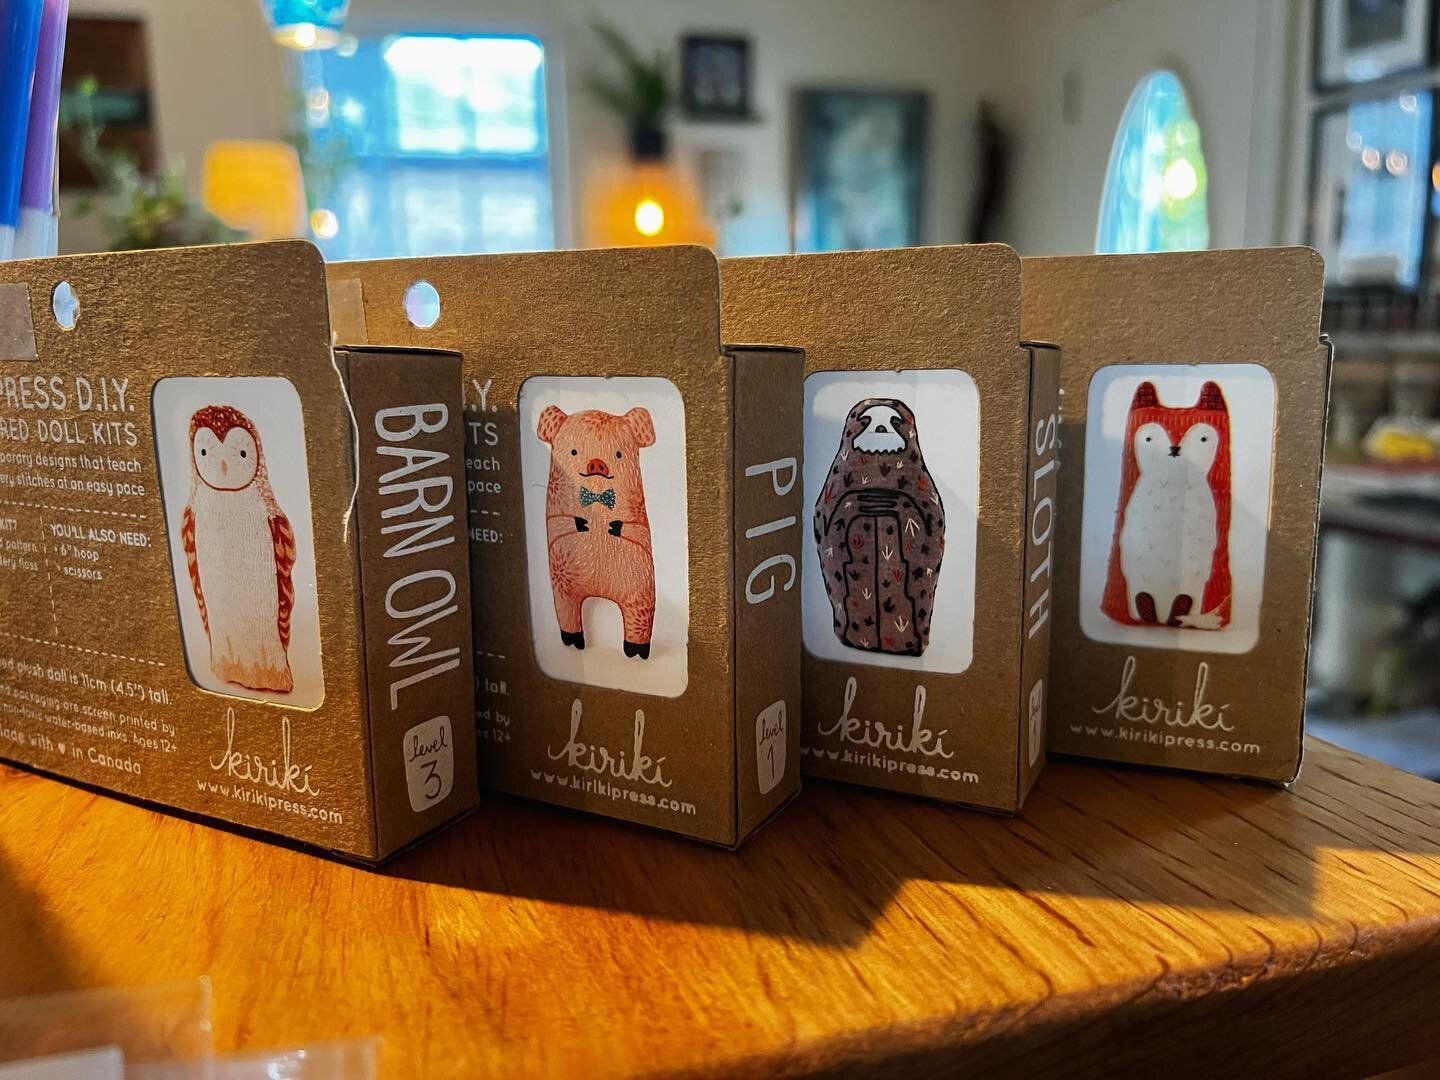 The absolute cutest kits have just arrived in the shop! I audibly gasped when I saw the piggy! But to be honest they are incredibly adorable. They are great for folk of all sewing levels and range from easy to intermediate if you like a little more a